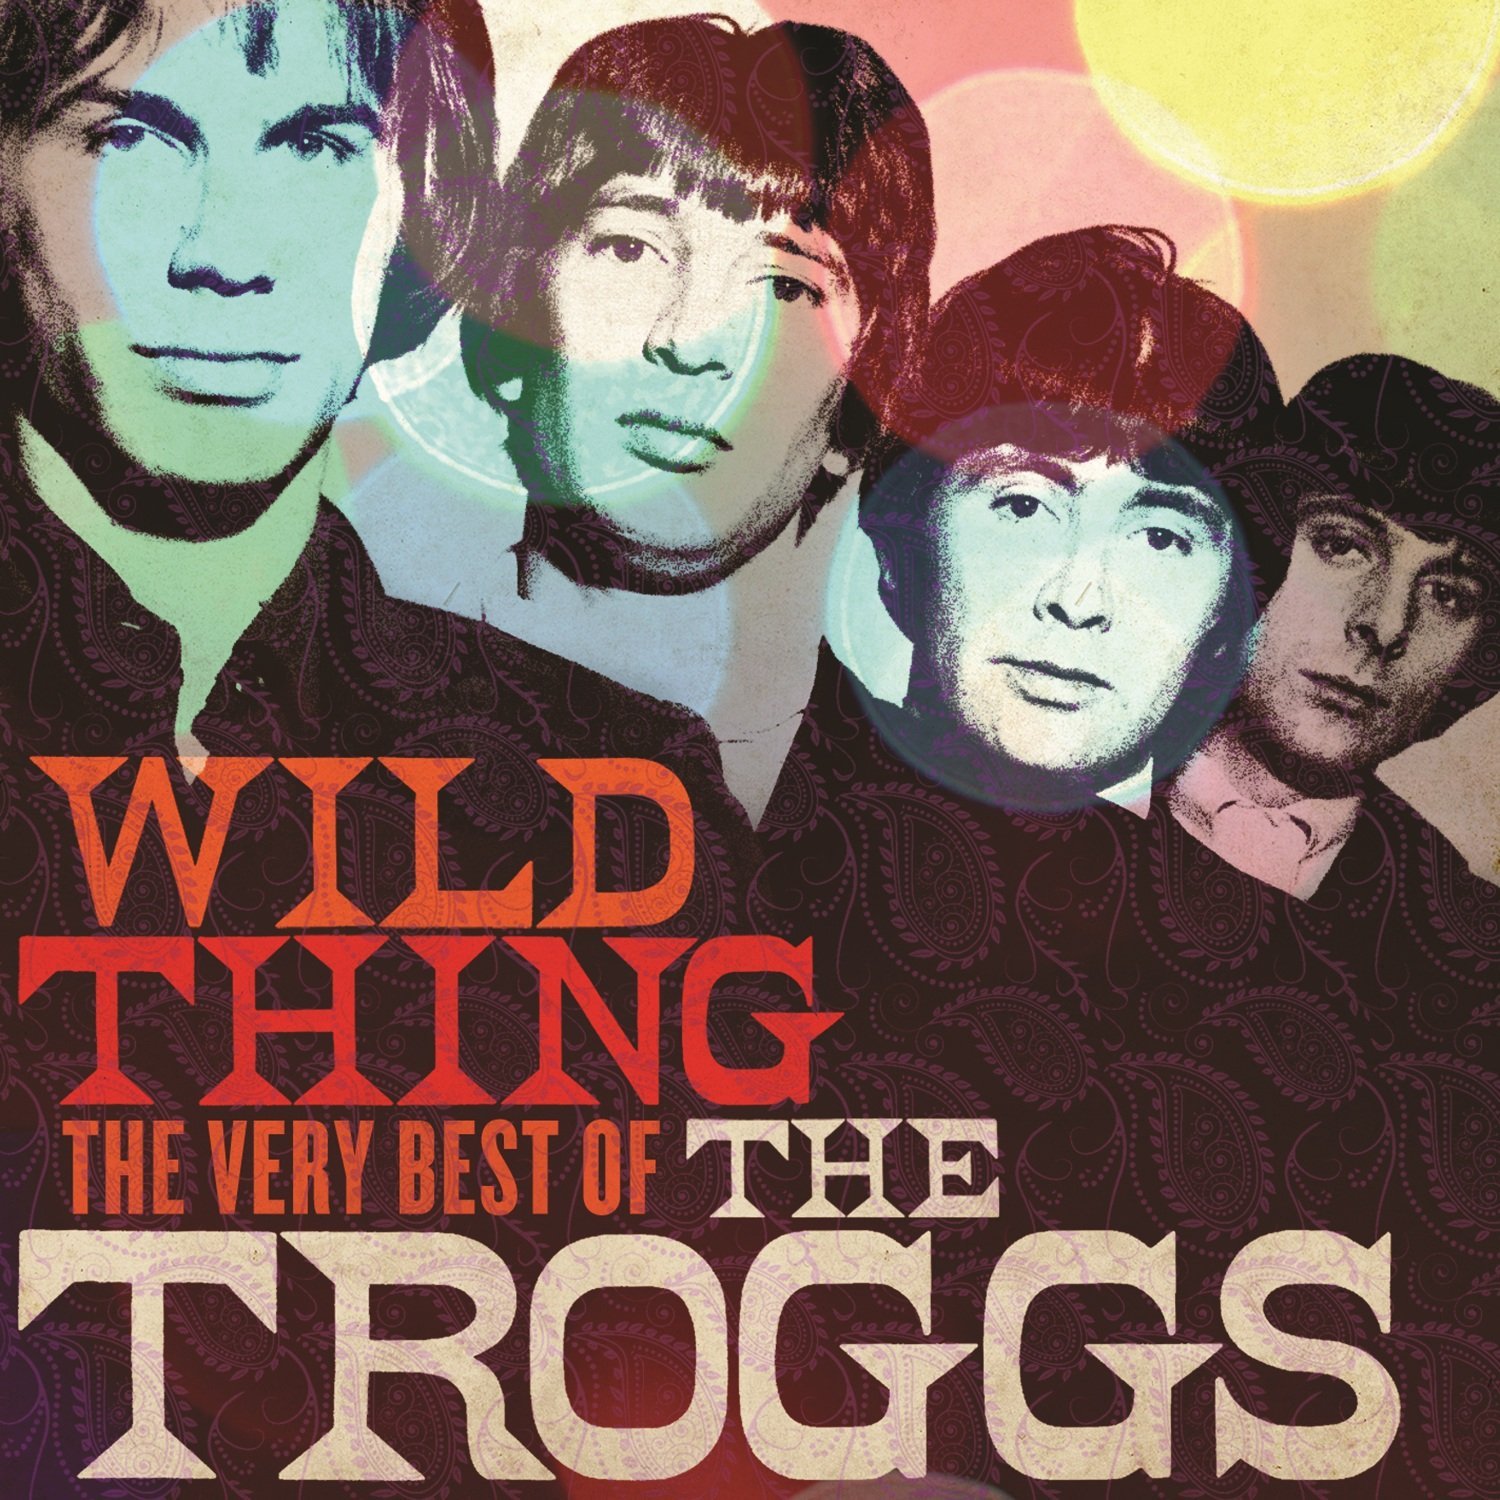 Troggs (The) - Wild Thing (The Very Best Of [Spectrum Music]) (Music CD)